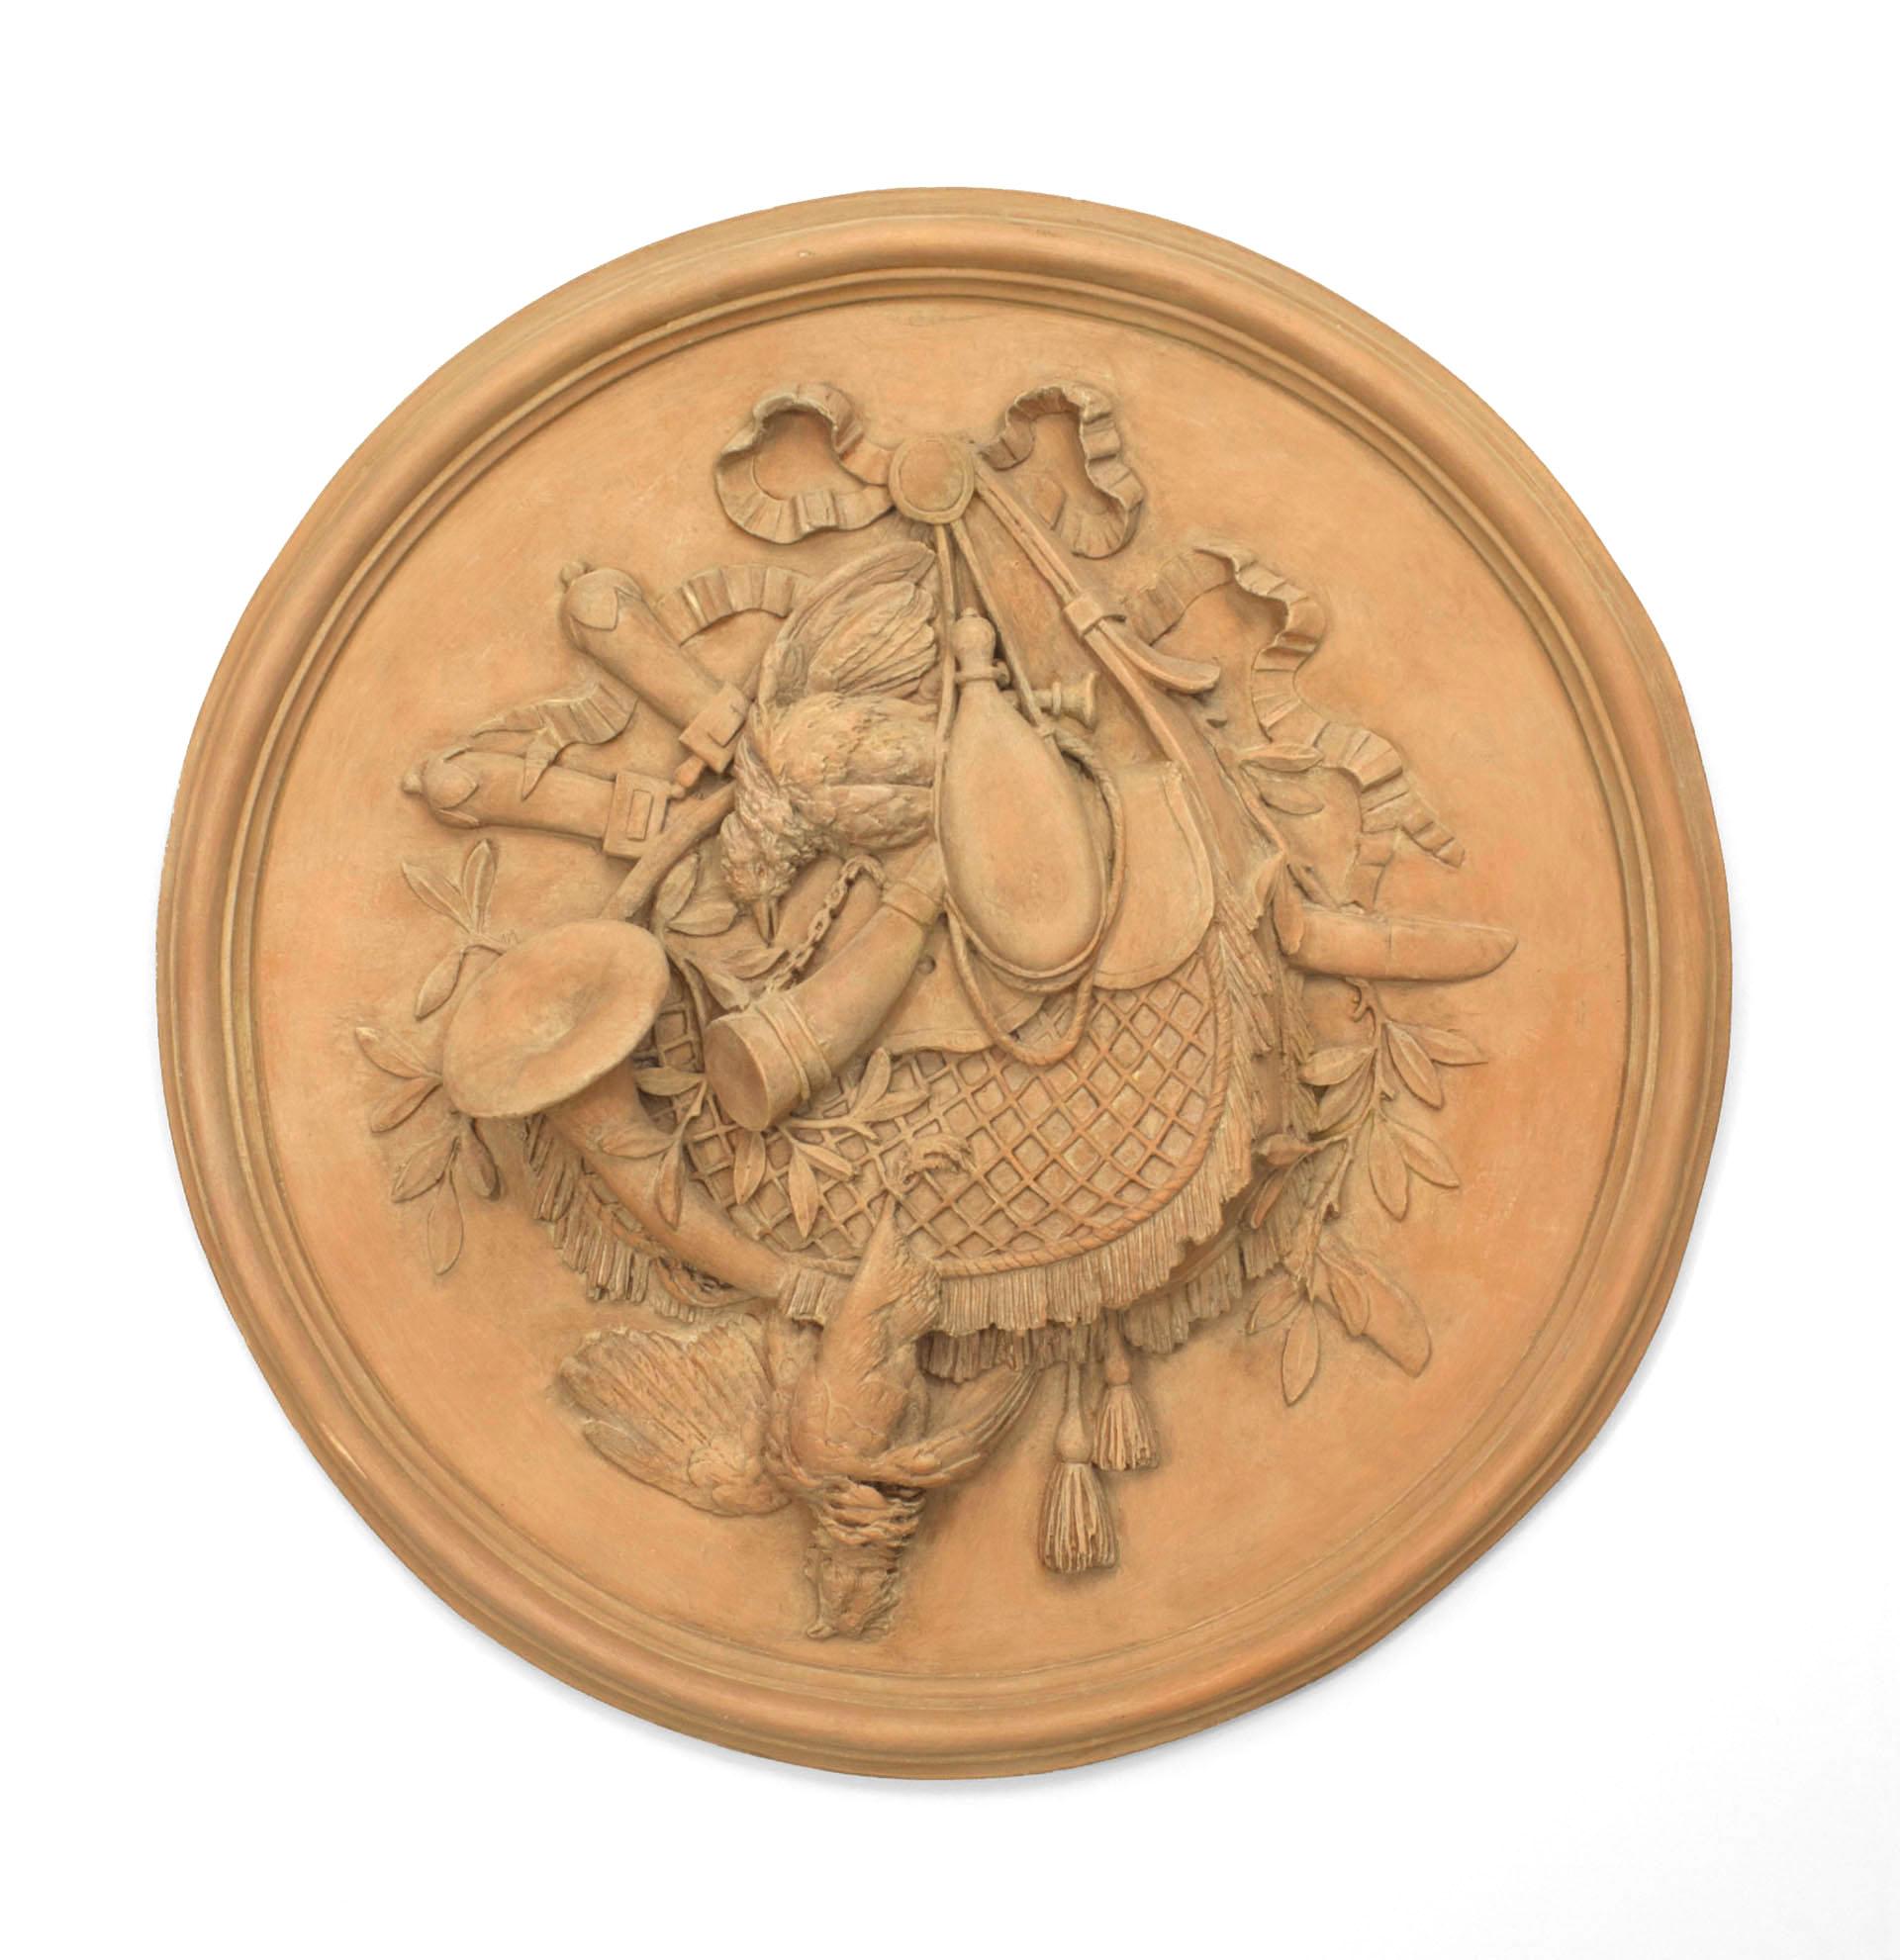 Pair of Rustic French style resin (faux terra cotta) bleached round wall plaque medallions with game and trophy motifs and a bow-knot top (PRICED AS Pair).
